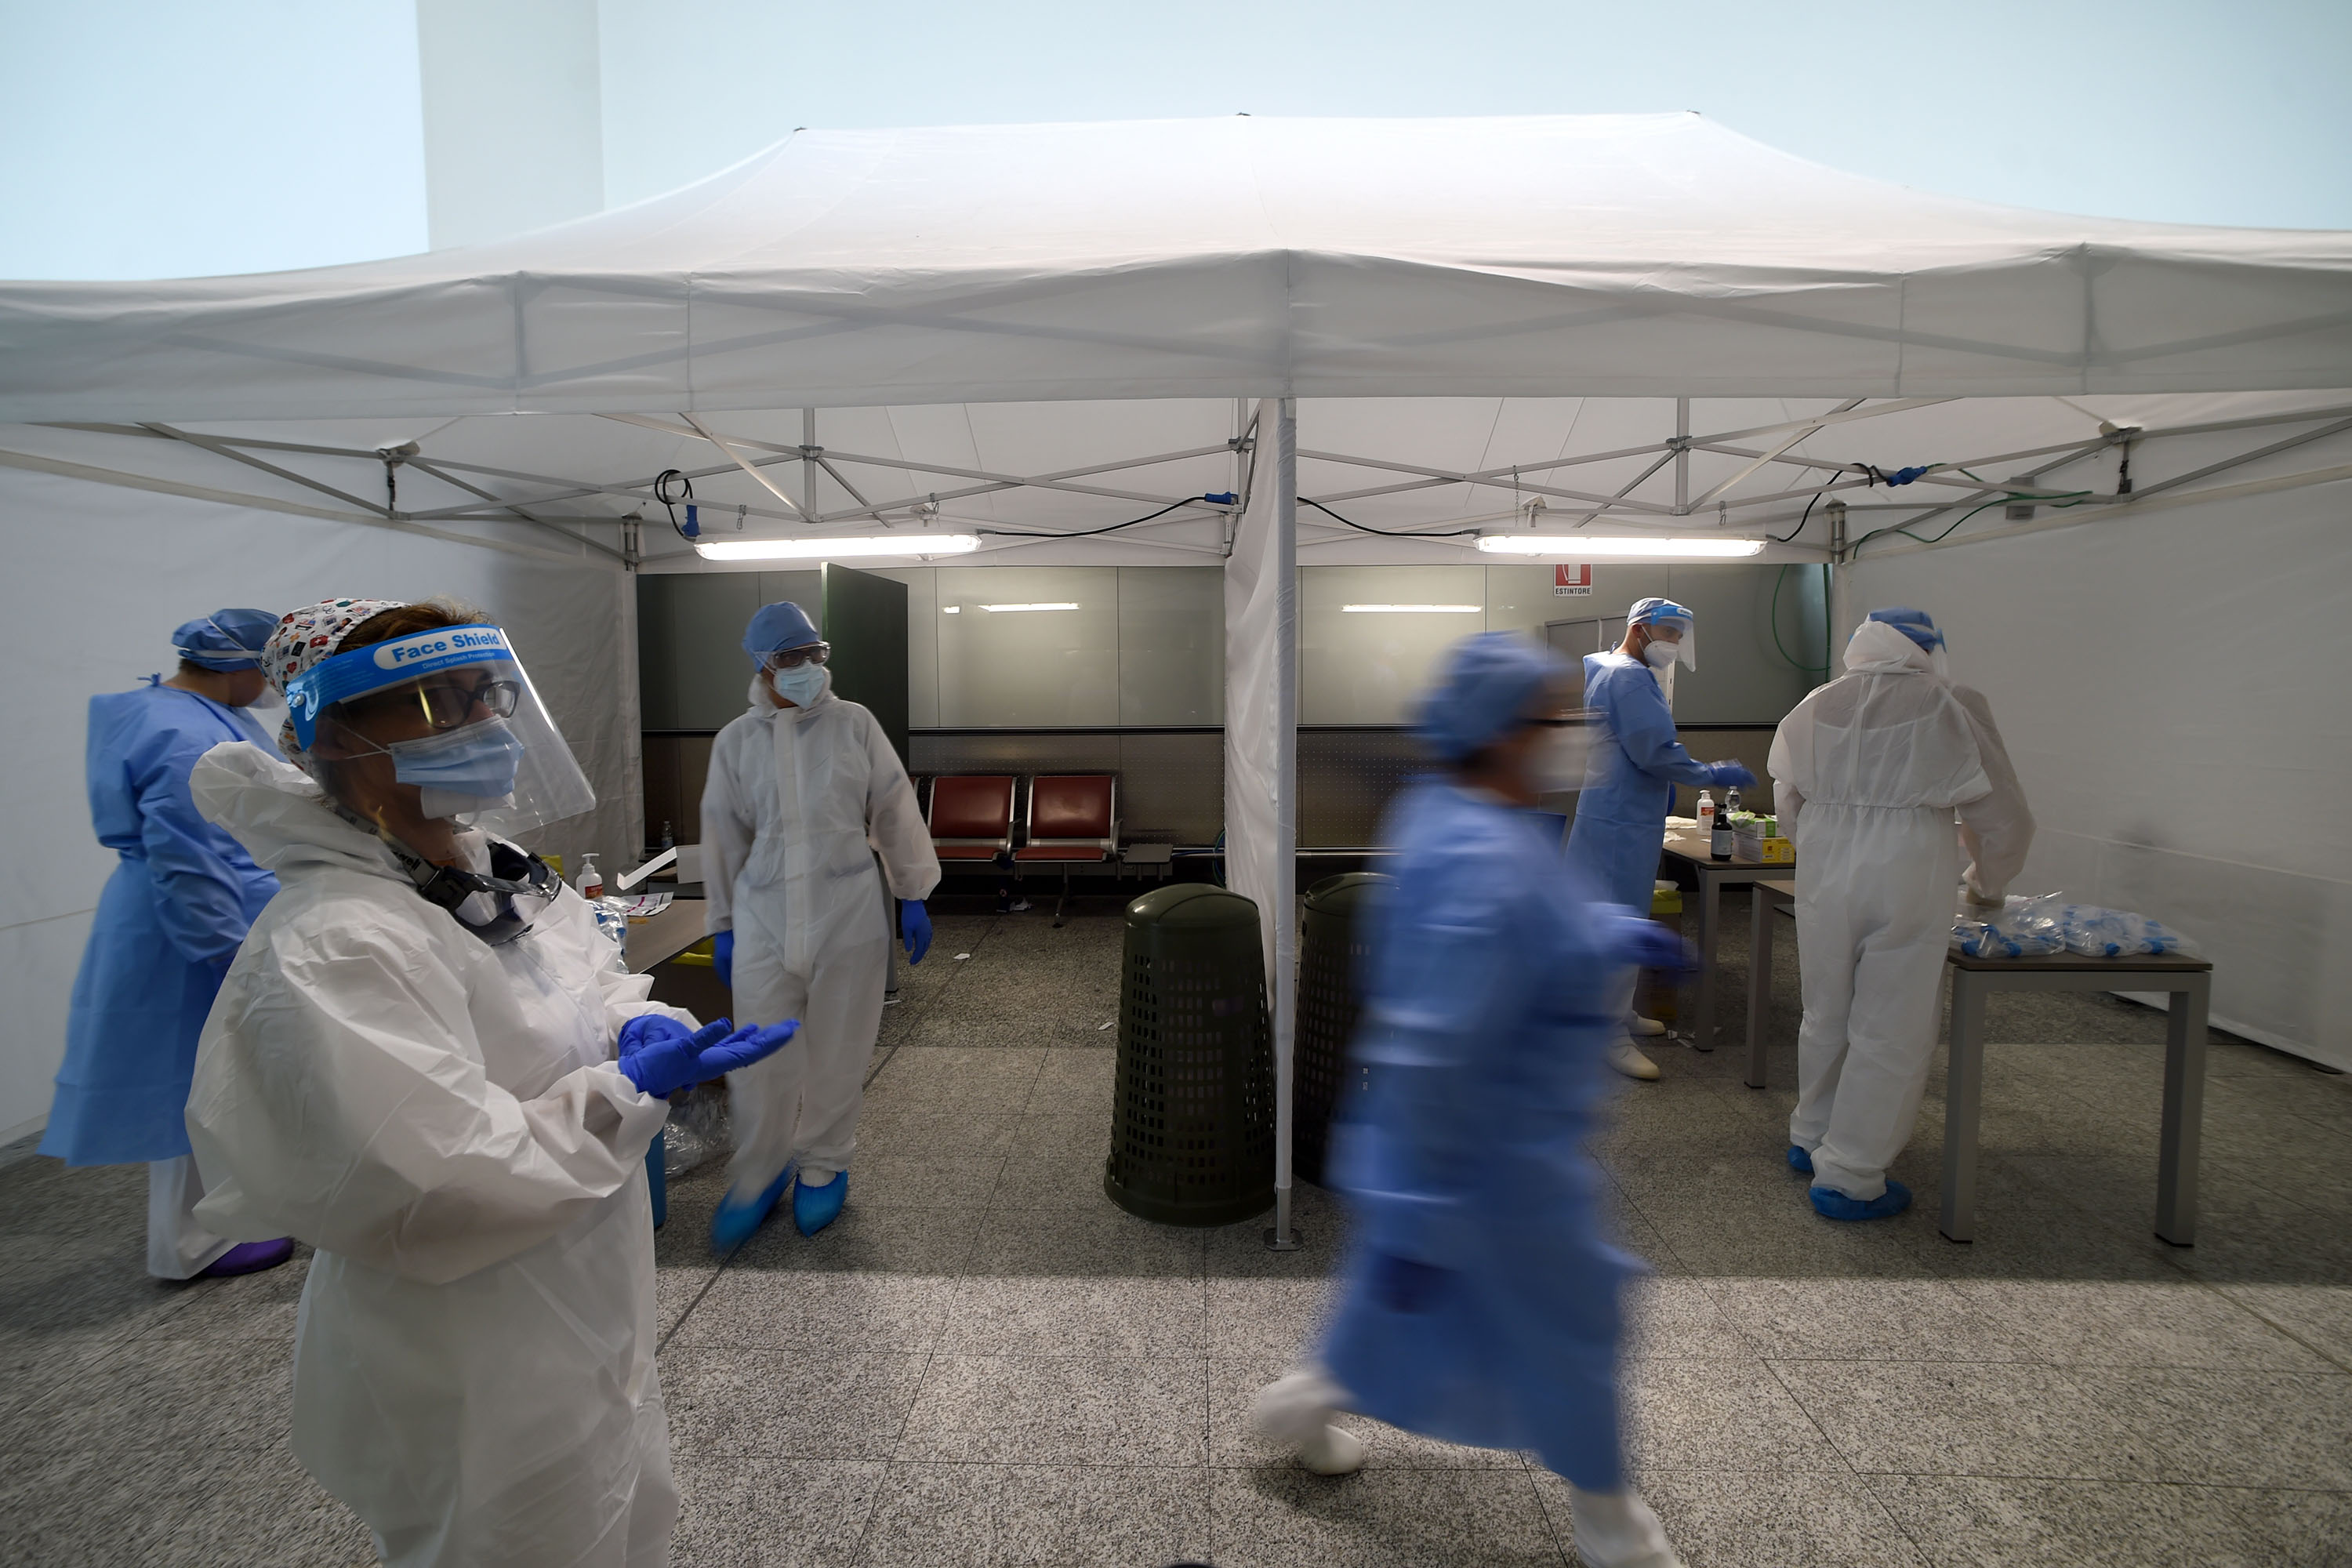 Healthcare professionals work to test travelers for Covid-19 at Malpensa Airport in Somma Lombardo, Italy, on August 20.